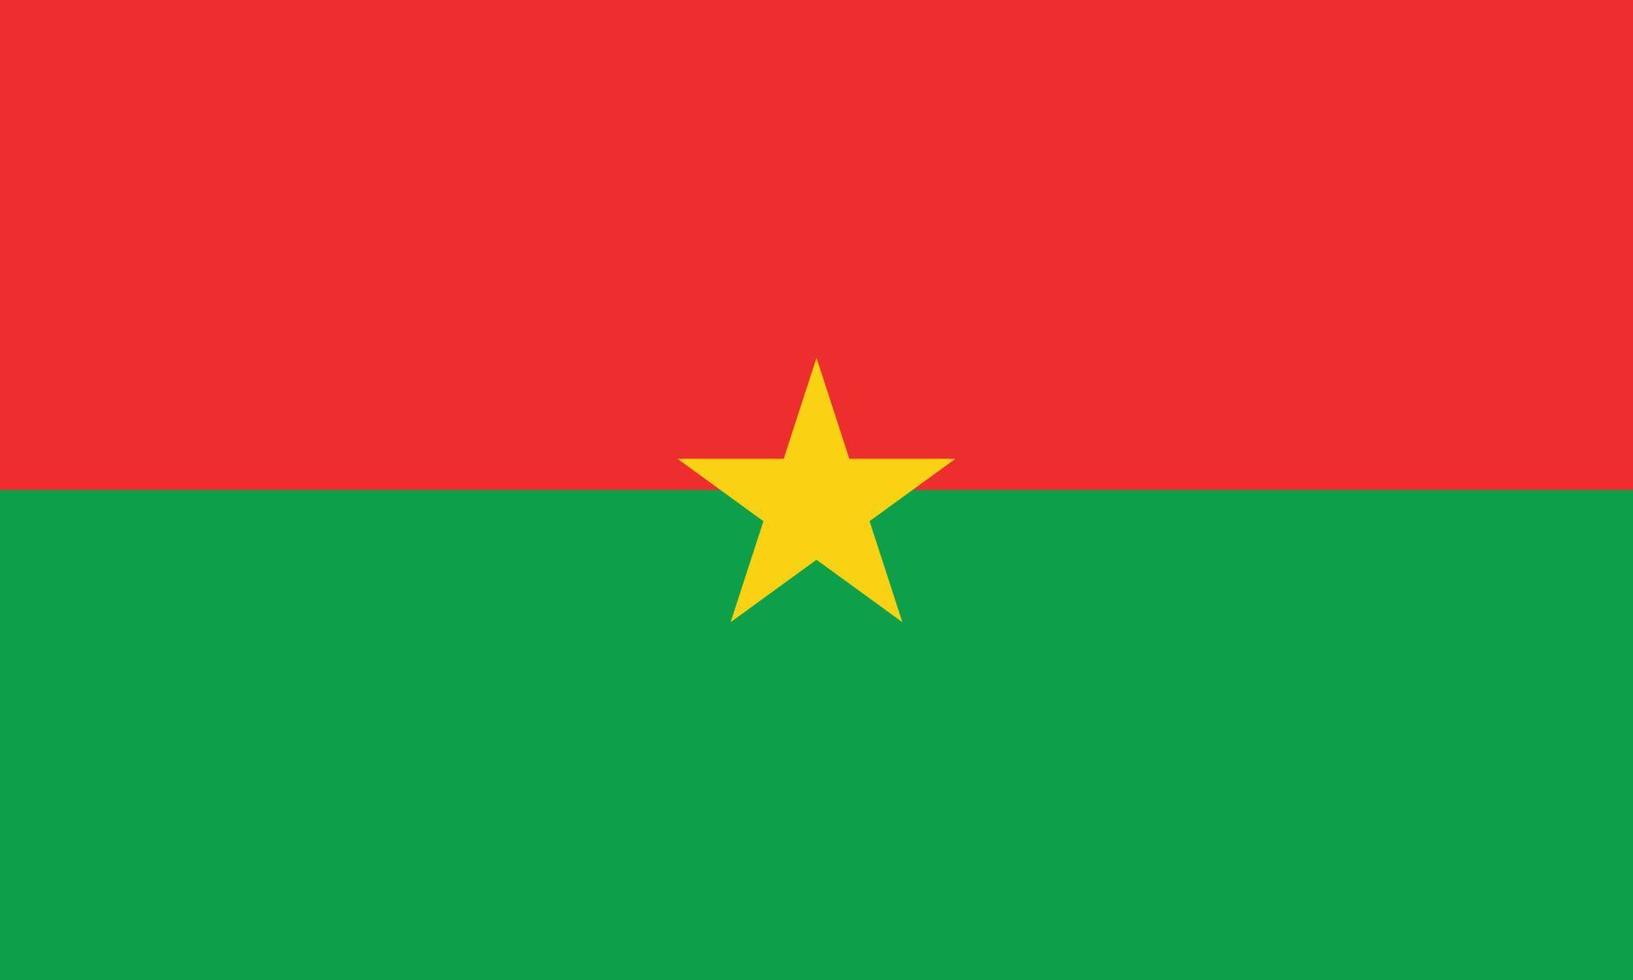 The national flag of Burkina Faso with official Pan-African colors. Flag of Burkina Faso vector illustration